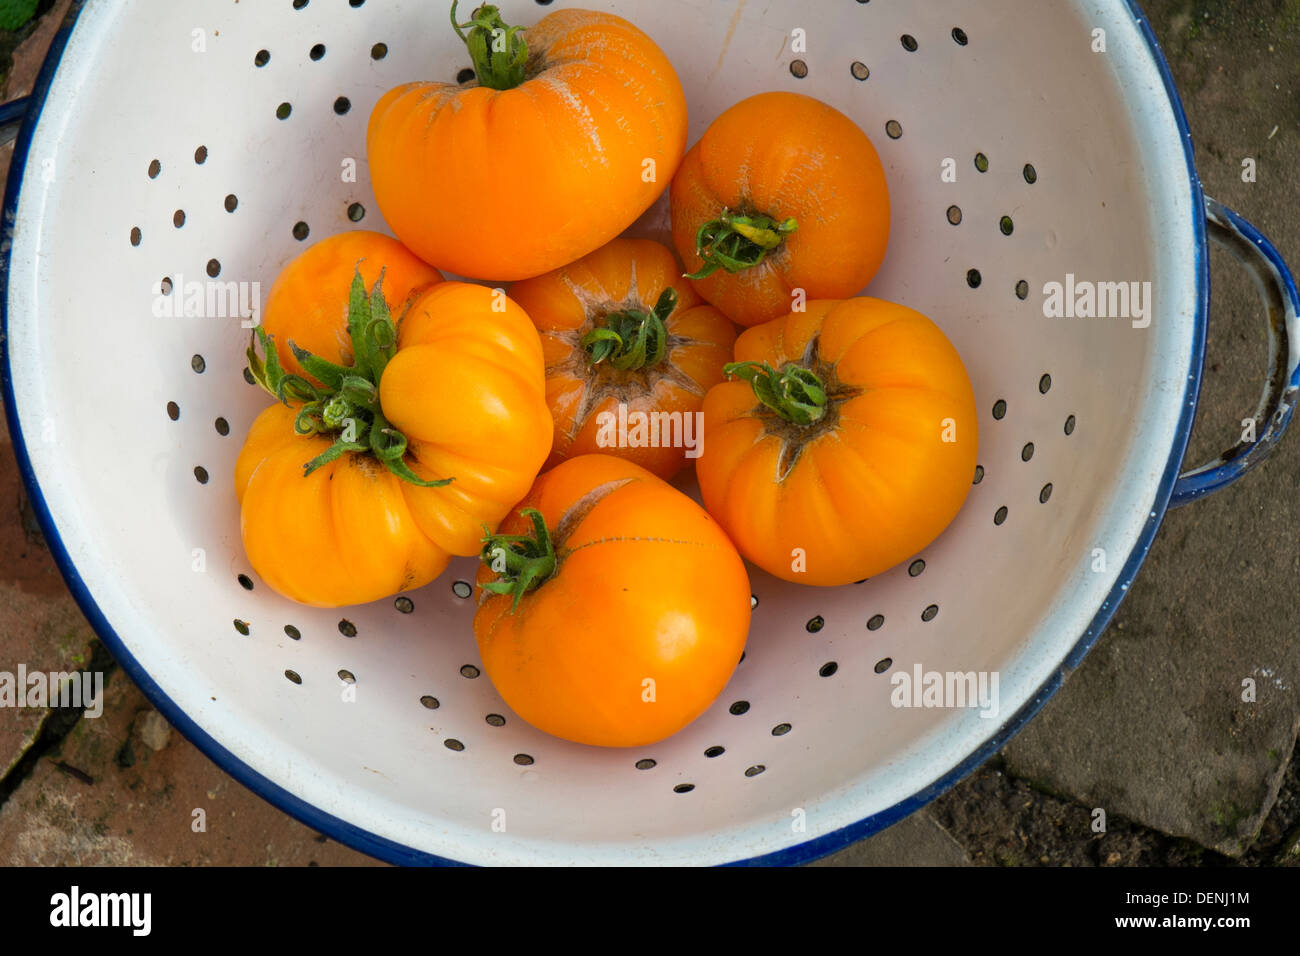 Heritage tomatoes, 'summer cider', ripe fruits ready for the kitchen. Stock Photo